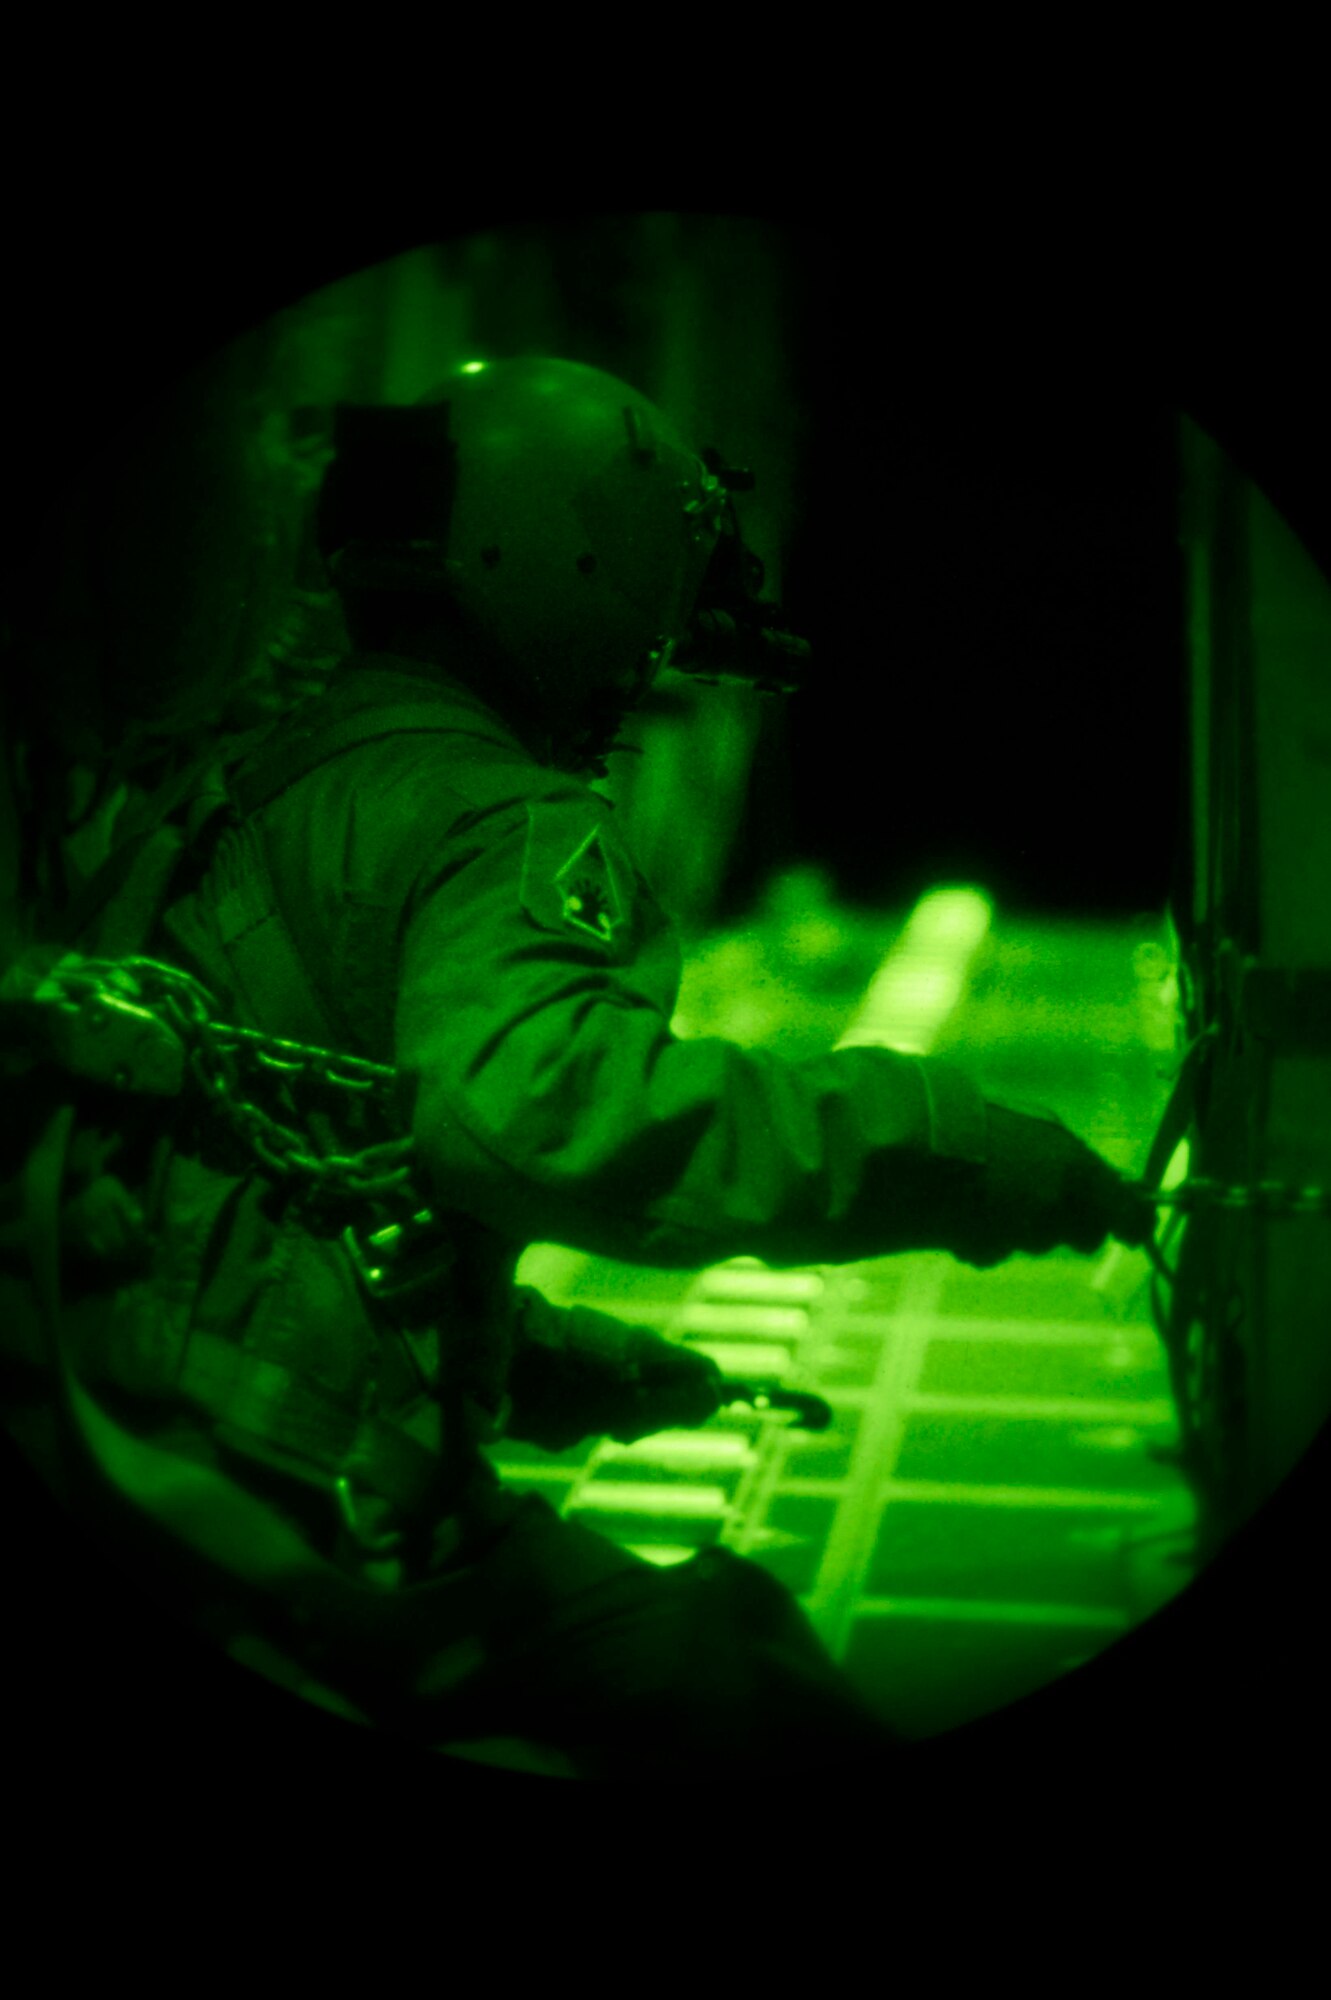 Staff Sgt. Bill Sauerer, 109th Airlift Squadron, cuts the strap to a containerized delivery system load in Yuma, Ariz., Feb. 26, 2014.  The CDS load simulates mission essential equipment such as vehicles, ammunition or rations being released from the C-130 Hercules.
(U.S. Air National Guard photo by Tech. Sgt. Amy M. Lovgren/Released)
